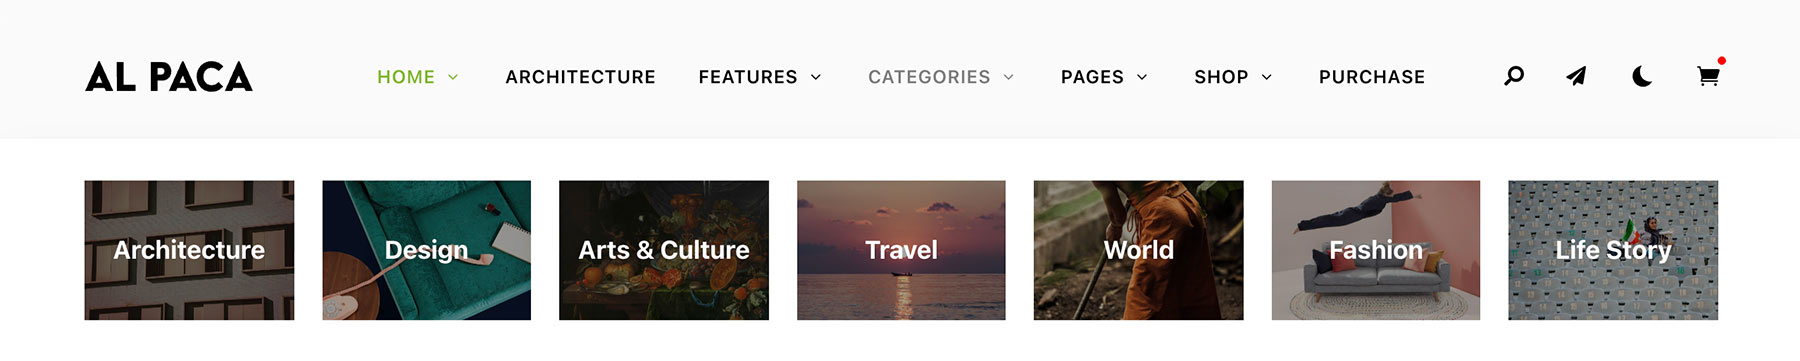 Display categories with images.